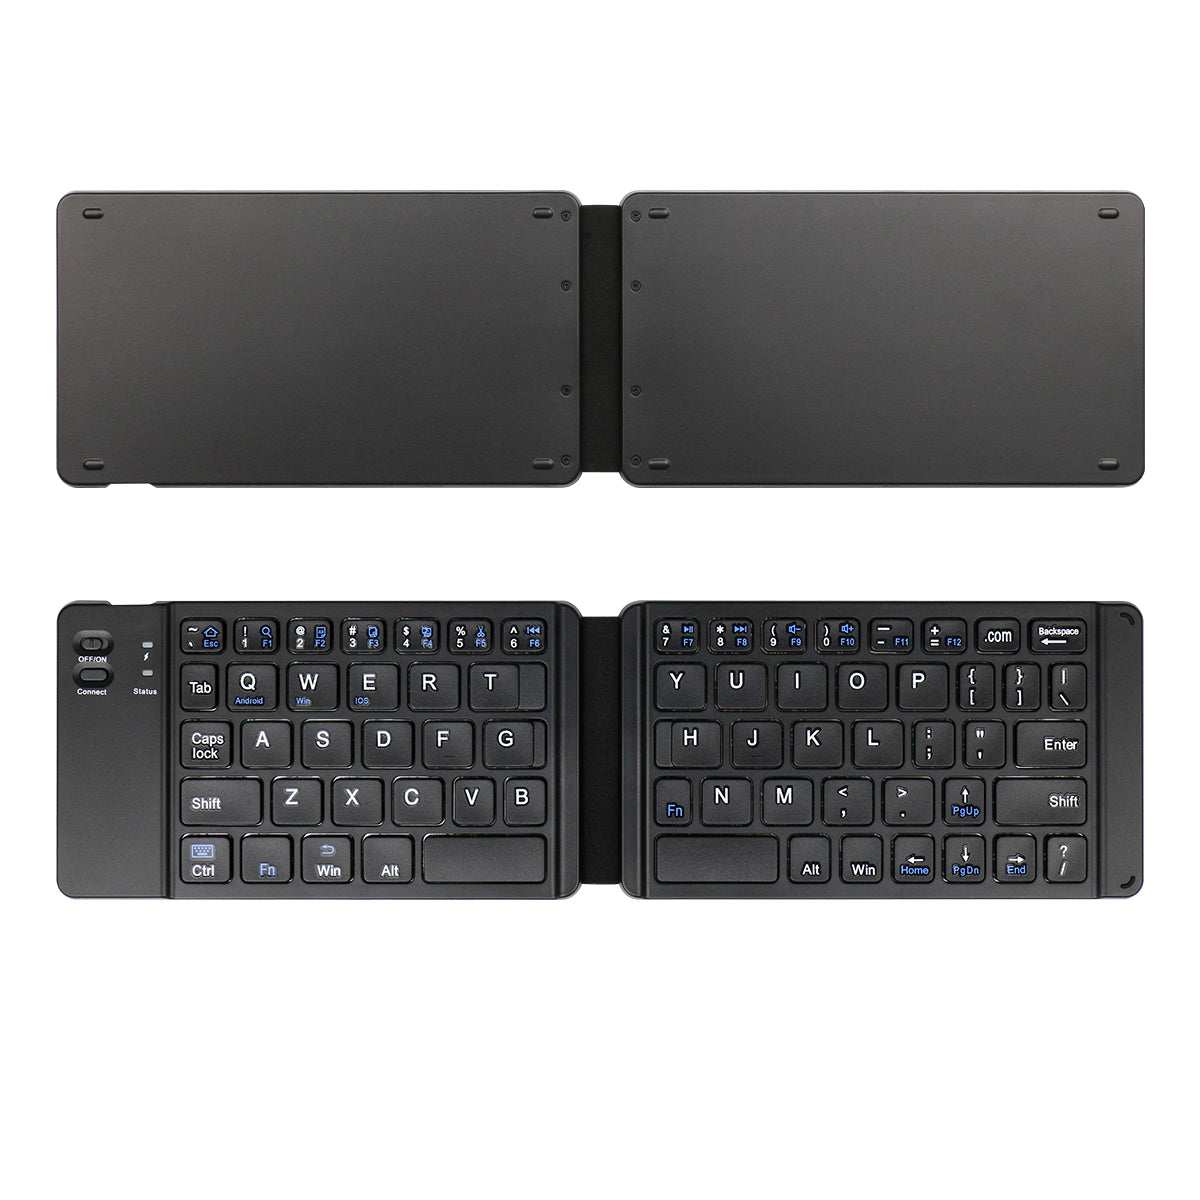 Ultra Slim Portable Bluetooth Foldable Keyboard Rechargeable Battery Travel Keyboard for iOS/Mac, Android, Windows Devices